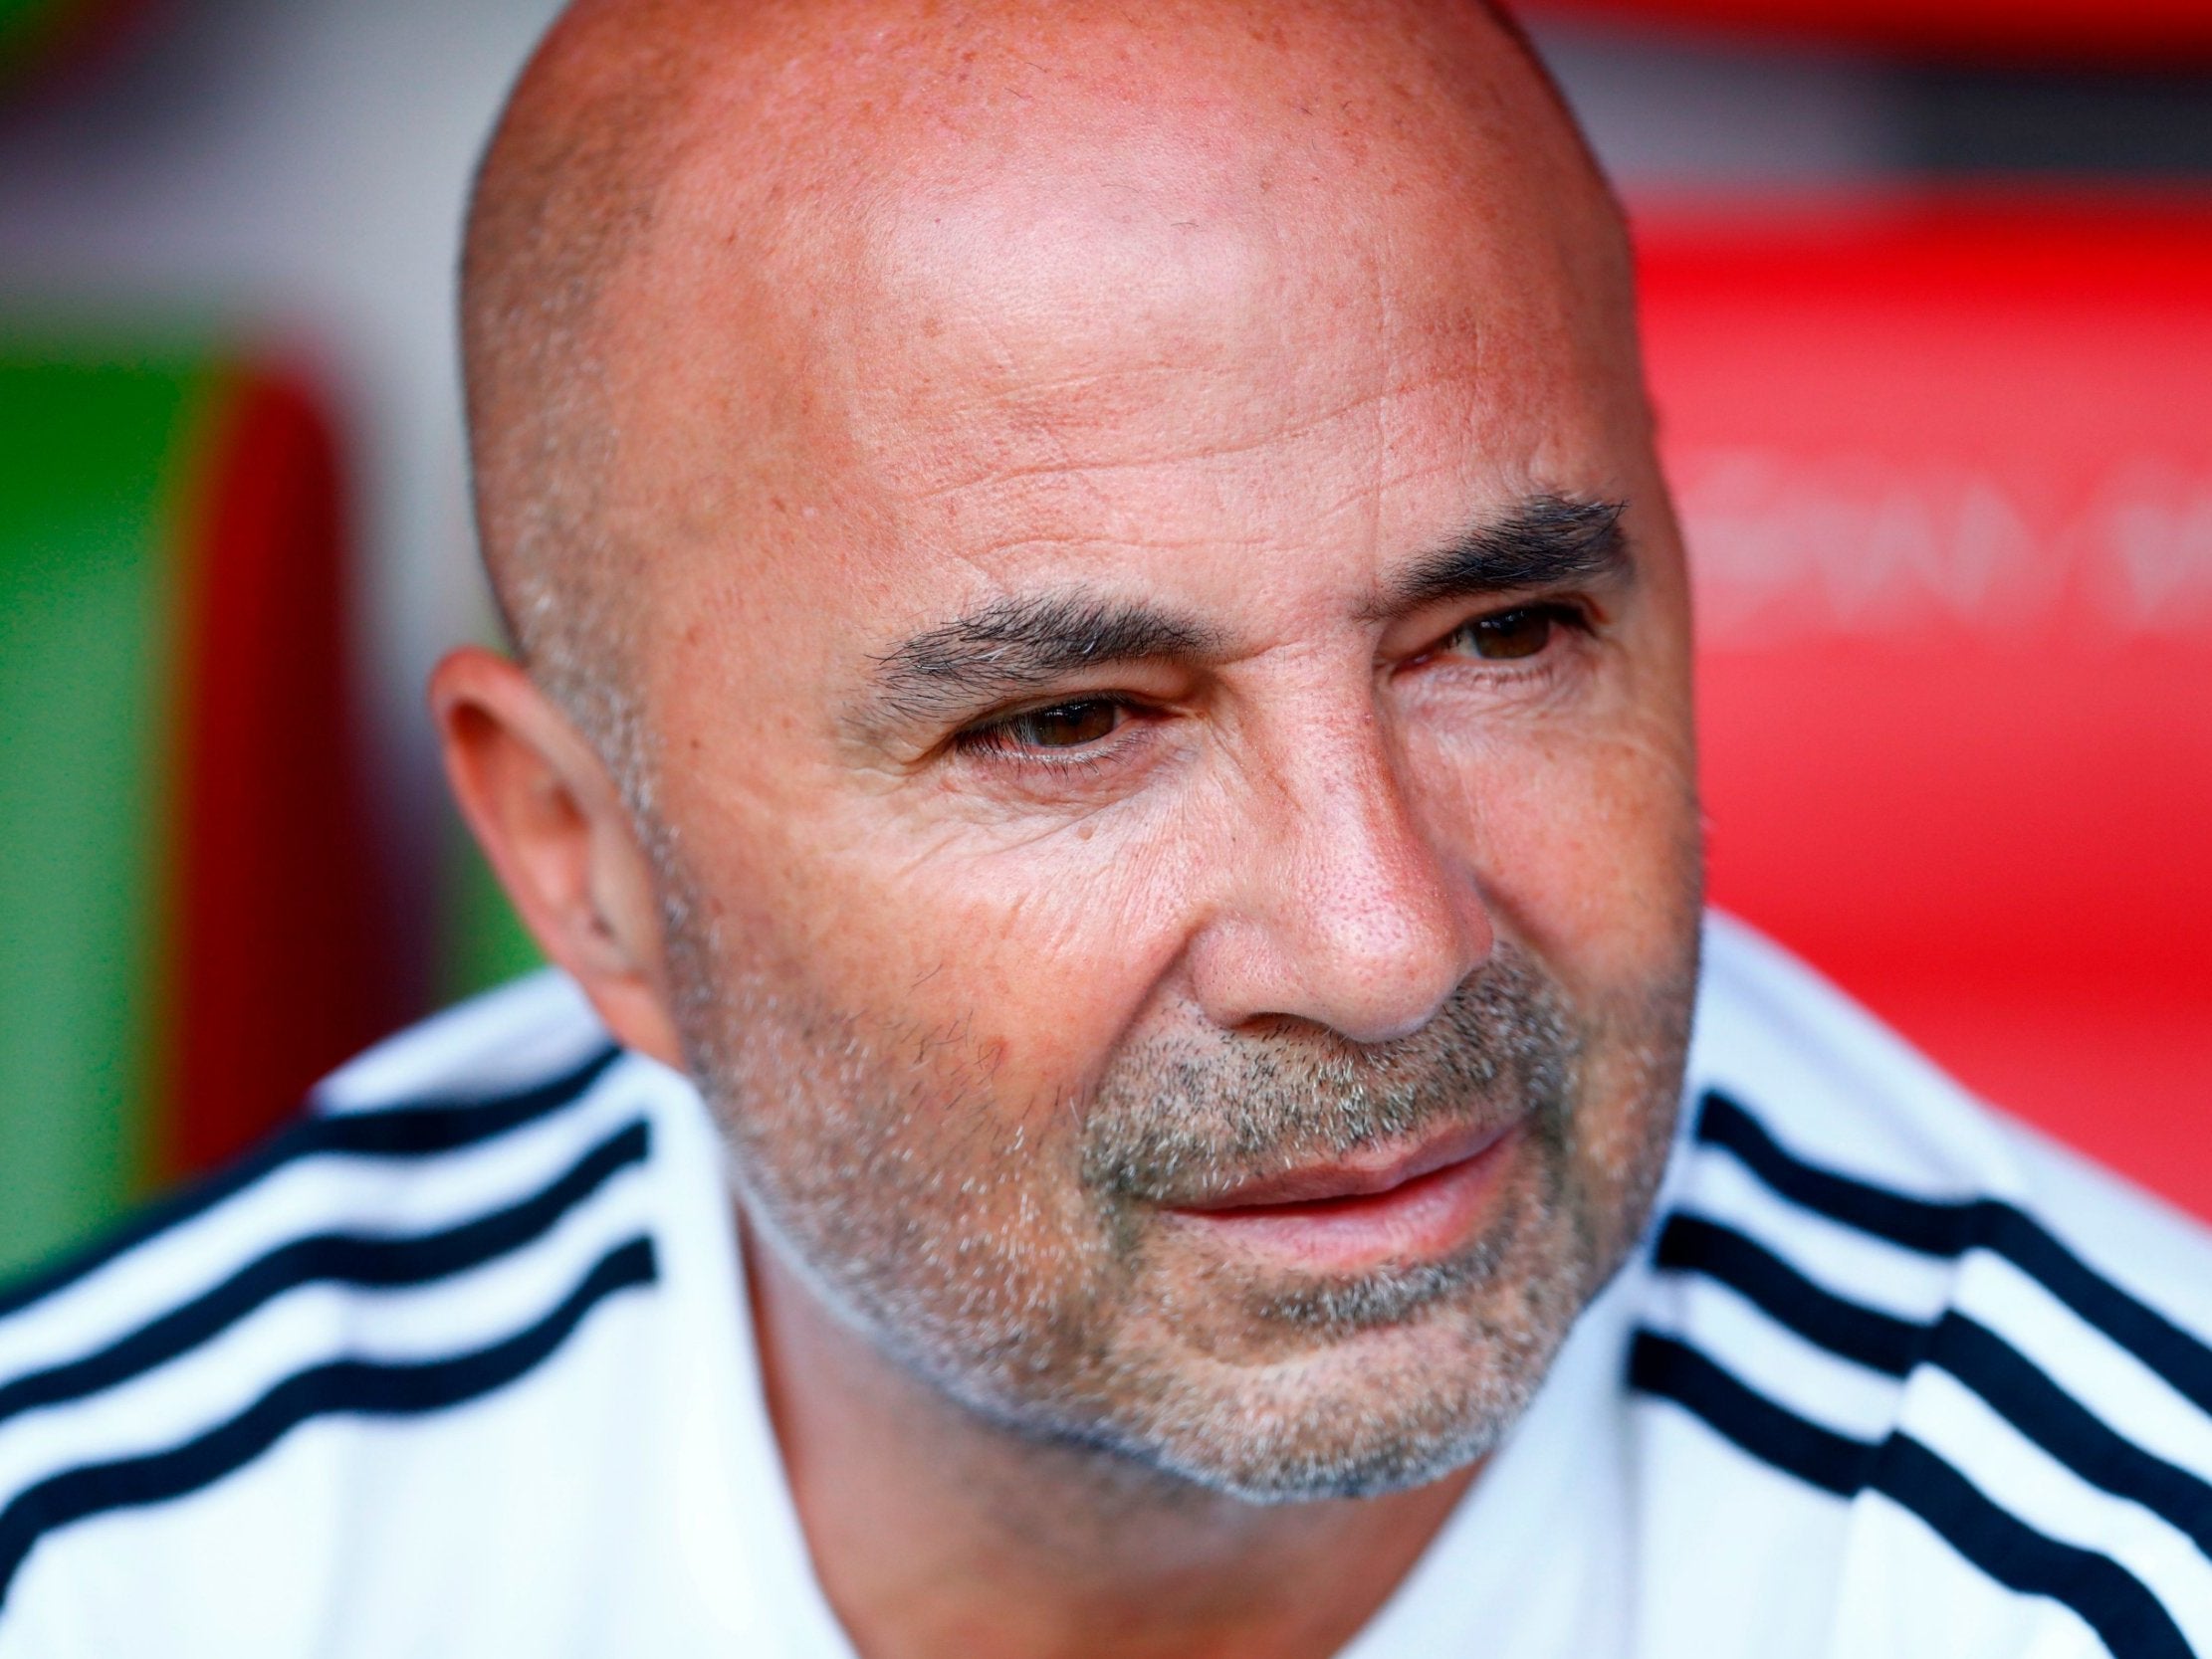 Sampaoli watched his side crash out of the tournament (AFP/Getty Images)